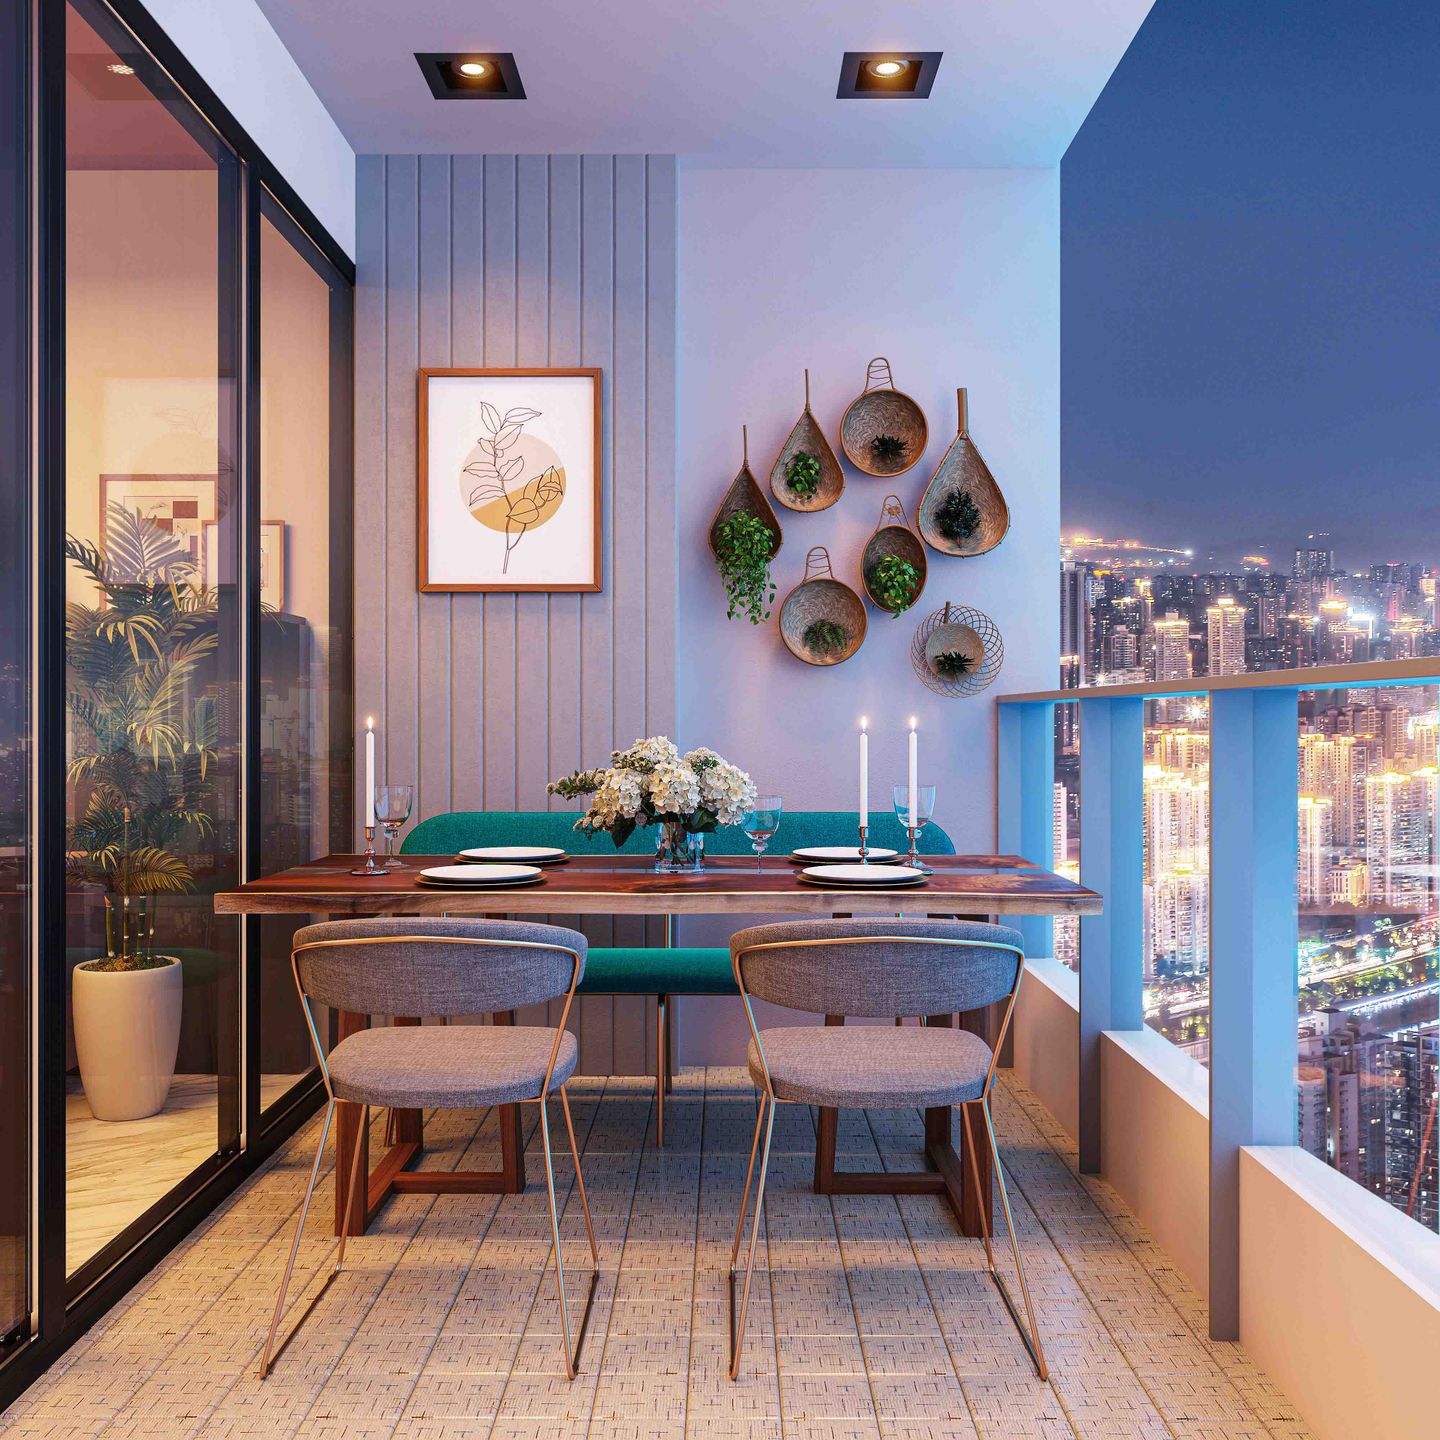 Balcony Design With 4-Seater Dining Table, White Wall Paint And Turquoise Seater - Livspace